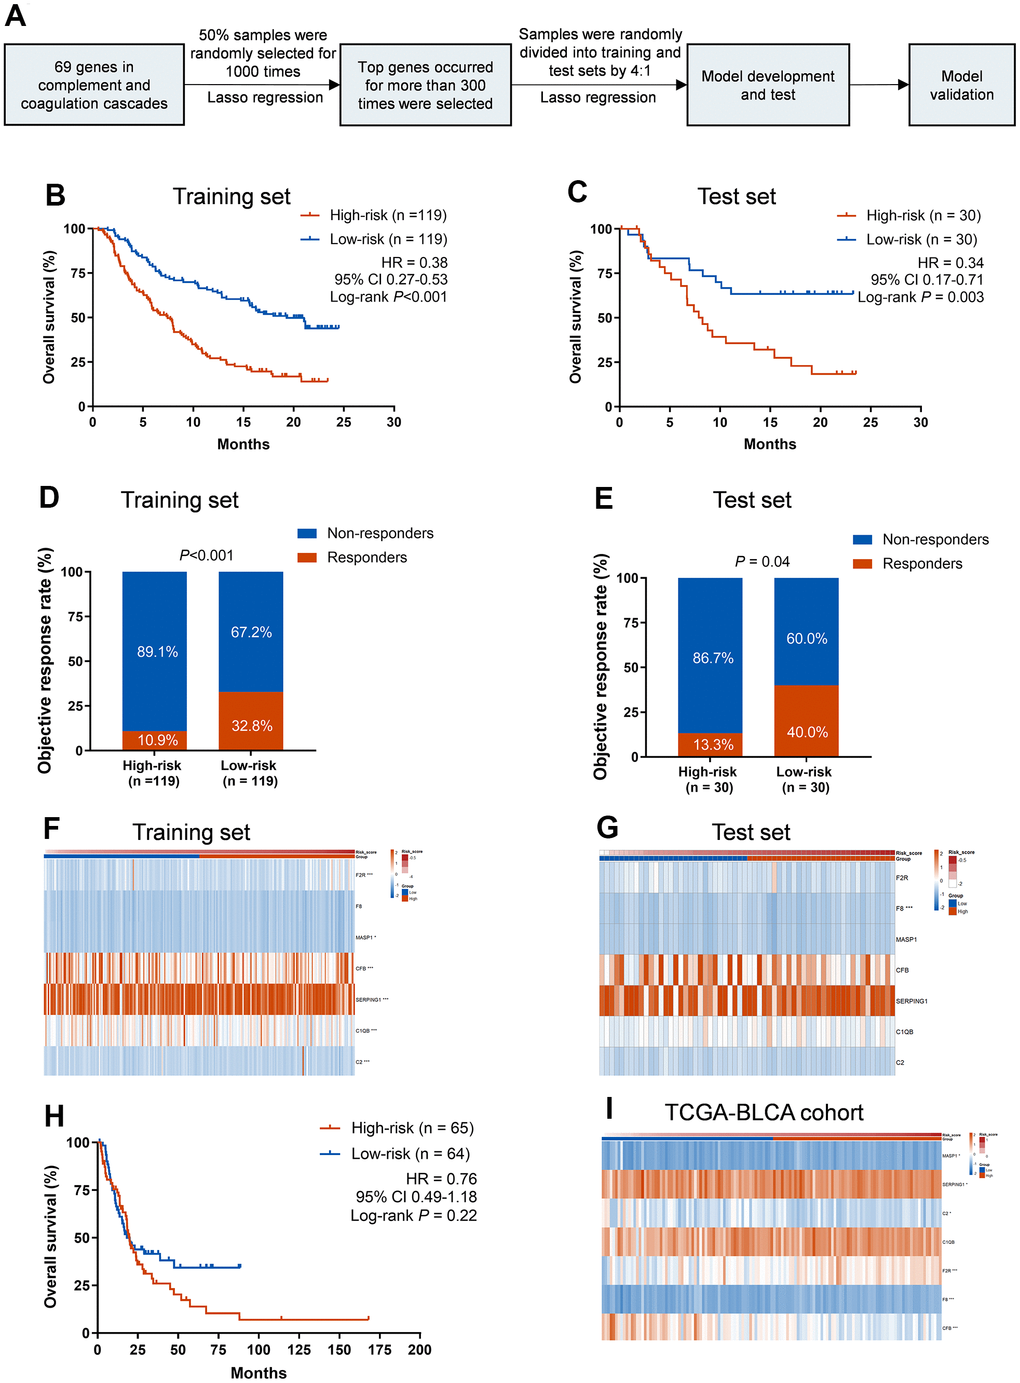 Training and validation of the CCCP risk score in mUC and TCGA-BLCA cohort. (A) Workflow for the construction of the CCCP risk model. (B, C) Kaplan-Meier curves of OS comparing patients with high- and low-risk in the training (B) and test sets (C). (D, E) Comparison of objective response rate between patients with high- and low-risk in the training (D) and test sets (E). (F, G) Heatmaps depicting the expression of the seven core genes from CCCP in patients with high- and low-risk in the training (F) and test sets (G). (H) Kaplan-Meier curves of OS comparing patients with high- and low-risk in TCGA-BLCA cohort (I) Heatmap depicting the expression of the seven core genes from CCCP in patients with high- and low-risk in TCGA-BLCA cohort. CCCP, complement and coagulation cascades pathway; mUC, metastatic urothelial carcinoma; OS, overall survival.